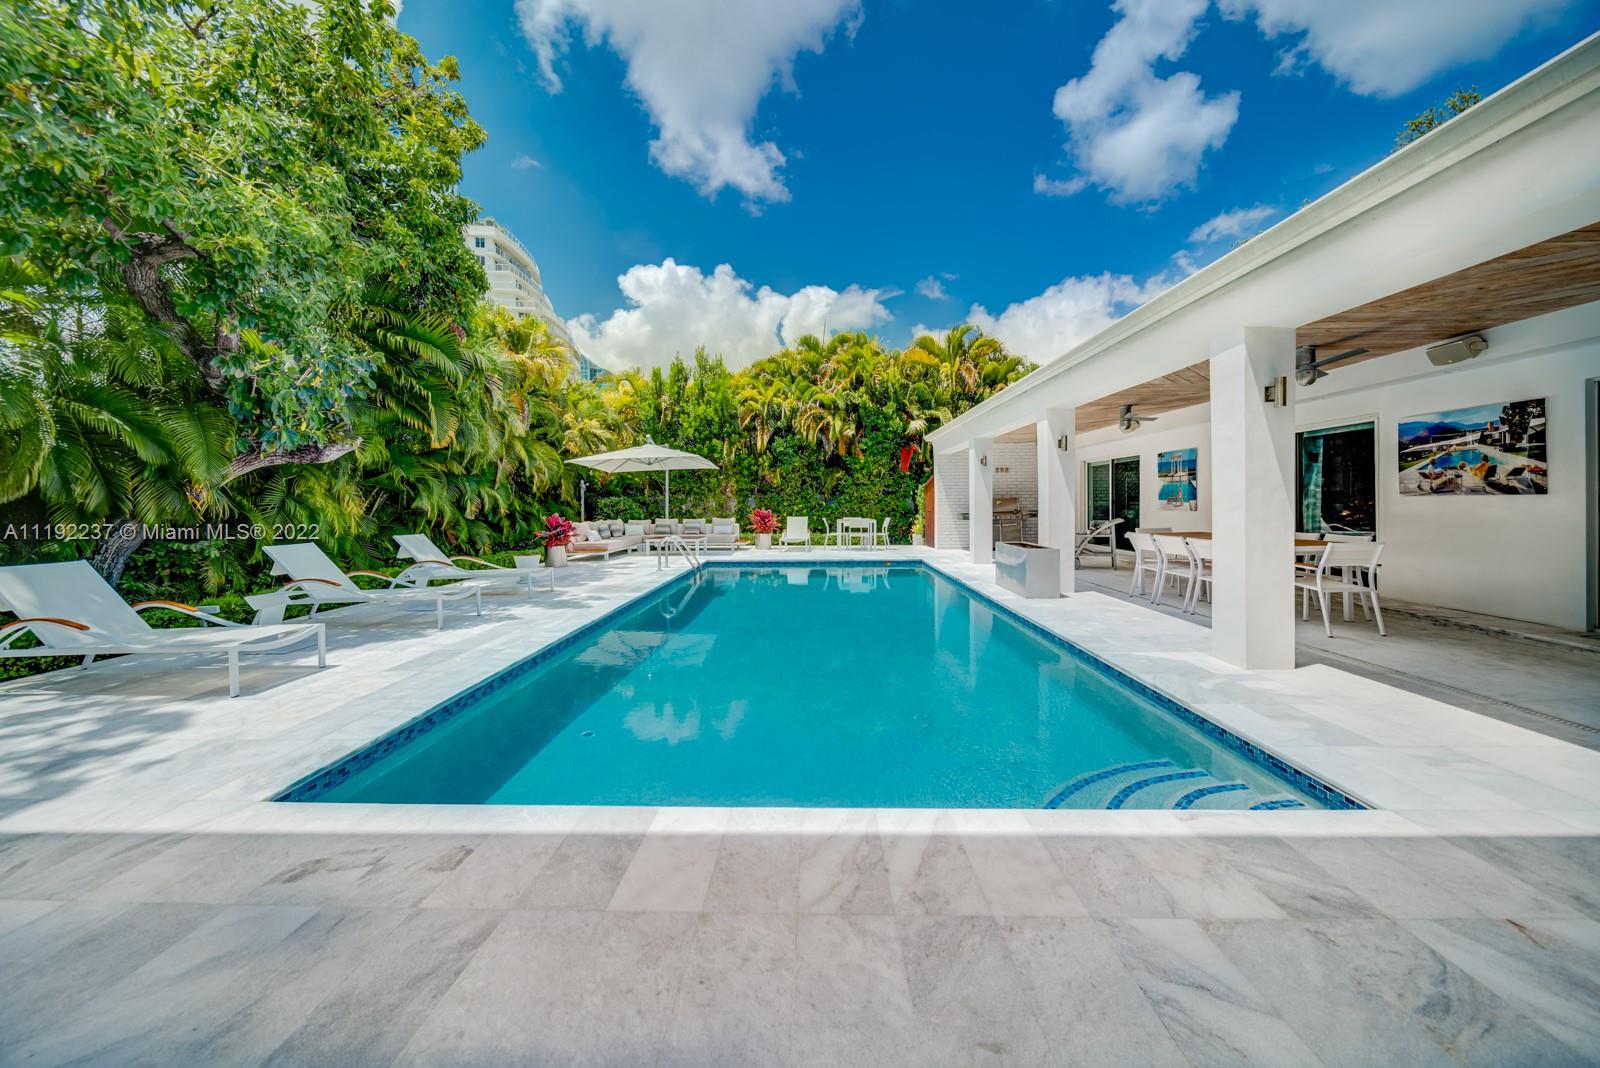 Enchanting modern contemporary residence in Miami’s upscale neighborhood, Bay Point Estates. The beautiful home, at the end of the cul-de-sac, sits on an oversized 16,988 sf lot offering immaculate lush landscaping. The NW end features a heated saltwater pool, & Calcutta deck with bbq area & rich greenery, while the SW end encompasses a 5,000 sf Zen Garden & koi pond leading to a brick path & bountiful Canopy trees. Indoors, the new owners can find an impressive master suite with a balcony, 3 more bedrooms, 3 baths, a large entertainment room & second living room, stunning kitchen with gas island and top of the line finishes, new AC & gas generator, and 2 car garage. The gated community of Bay Point Estates is just minutes from Miami's most famed shopping, dining, and top rated schools.